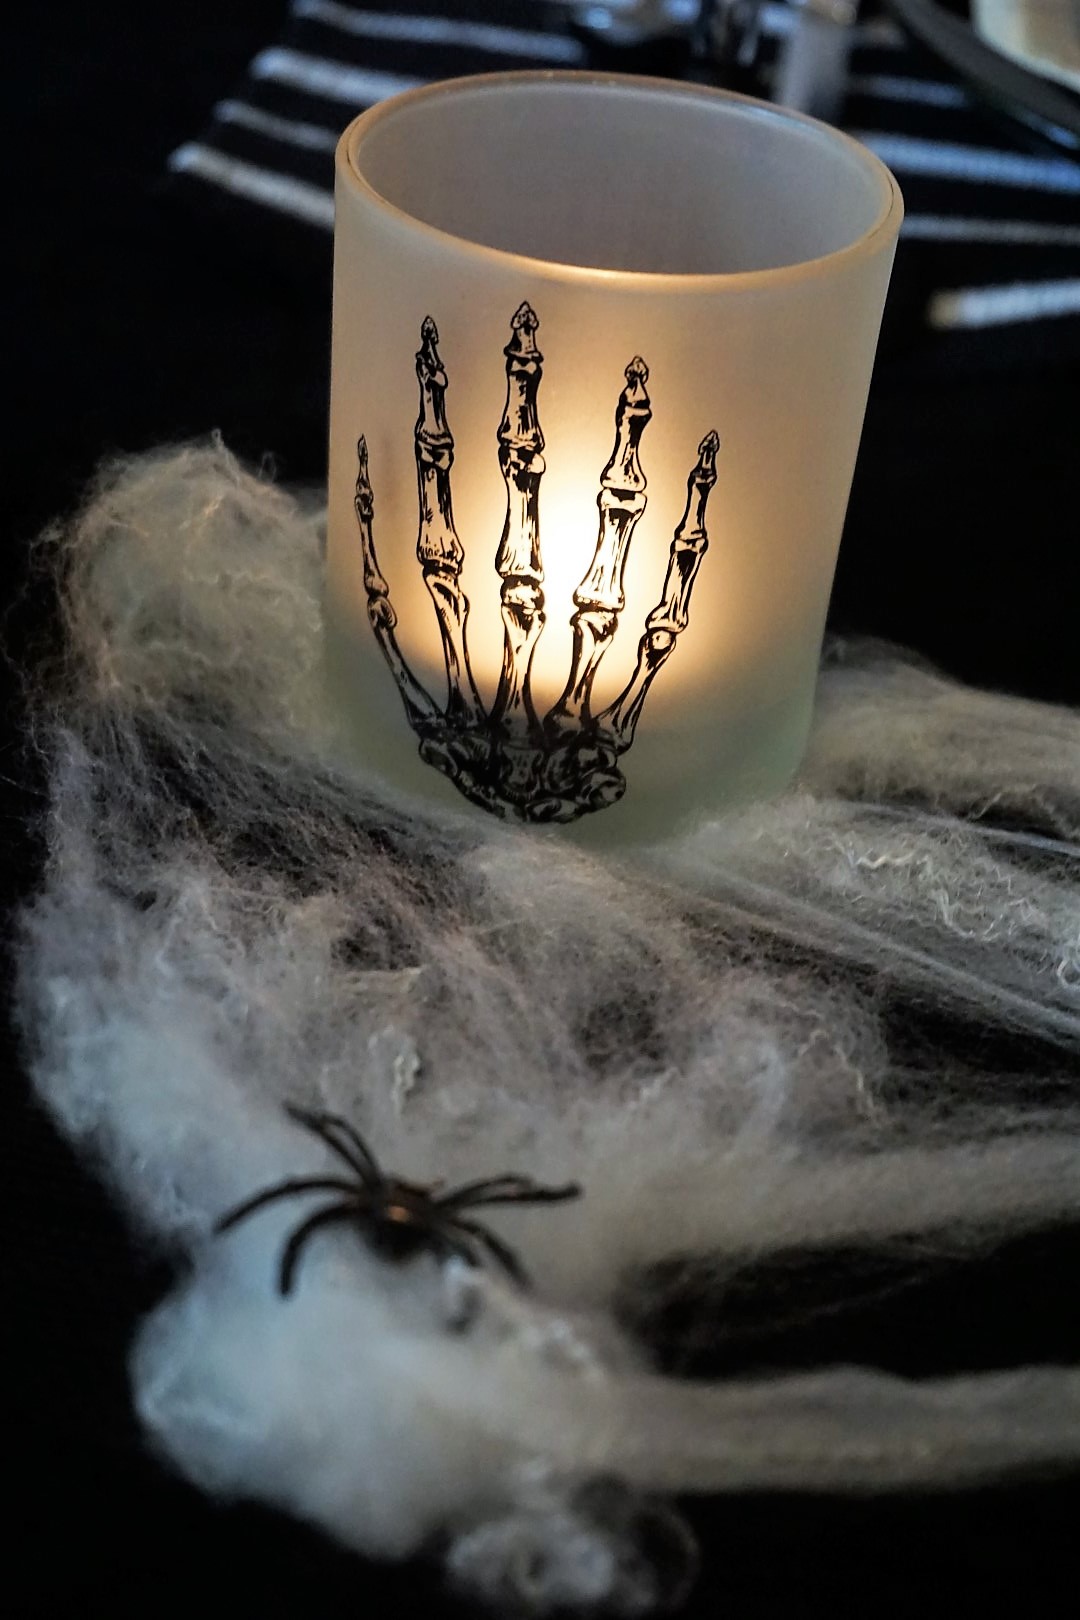  This pretty candle was a Dollar Tree find! Spooky chic doesn’t have to be expensive. Click here to see how to re-create this Halloween table! | Legally Crafty #halloweentable #halloweendiy #diyplacecards #halloweendecor #halloweendinnerparty 